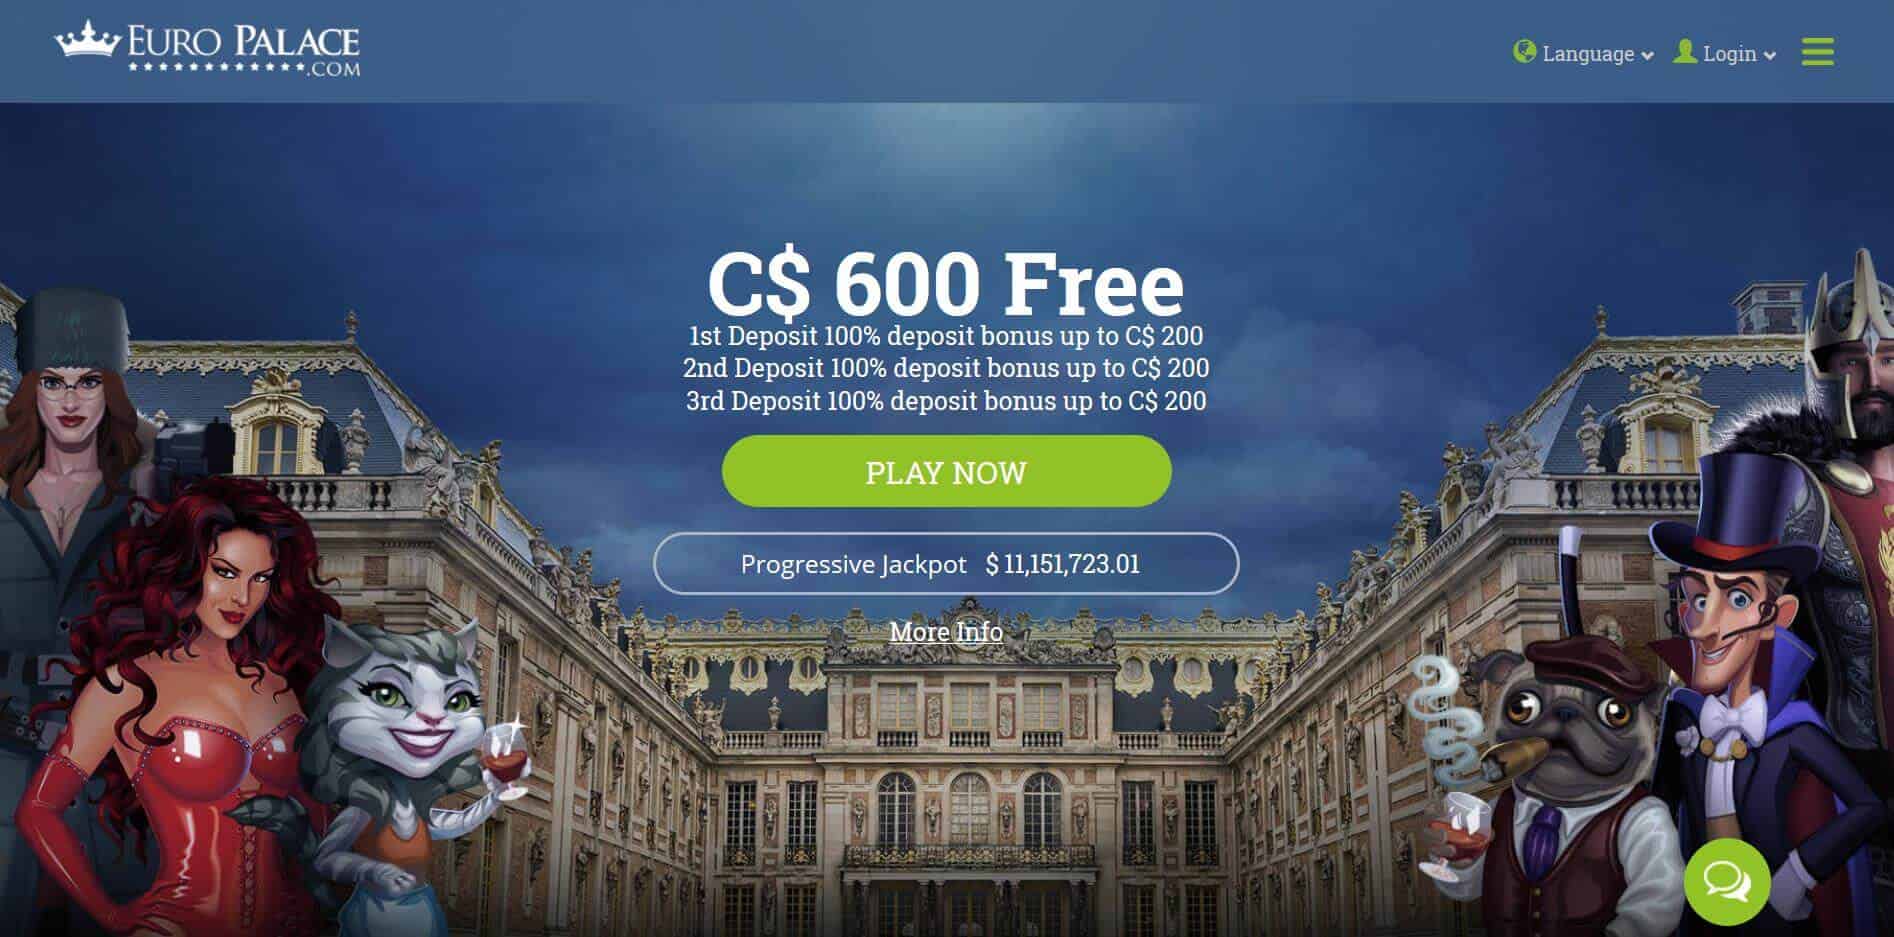 The Euro Palace Casino Canada offers a customized gaming interface for Canadian citizens, special promotions as well as a native French version.